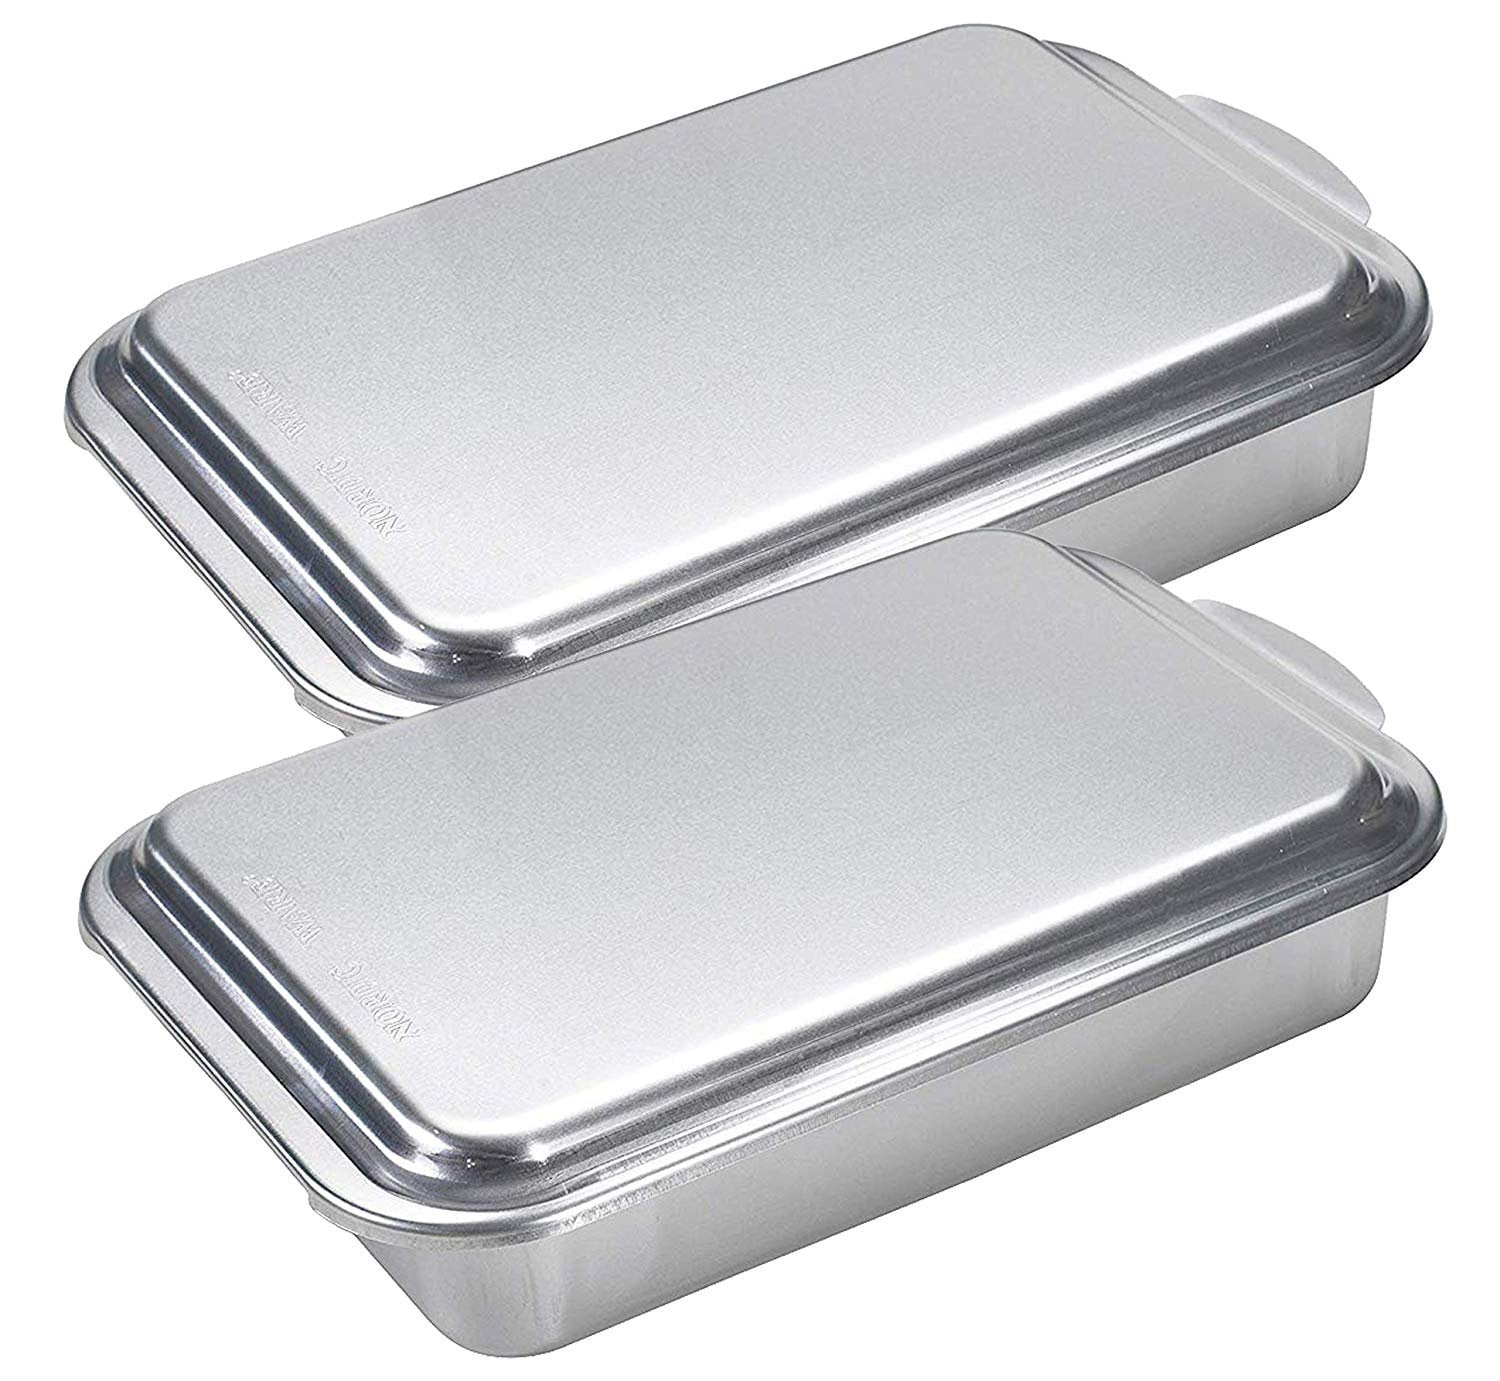 Lindy&s 8W44 Stainless Steel 9 x 13 Inches Covered Cake Pan